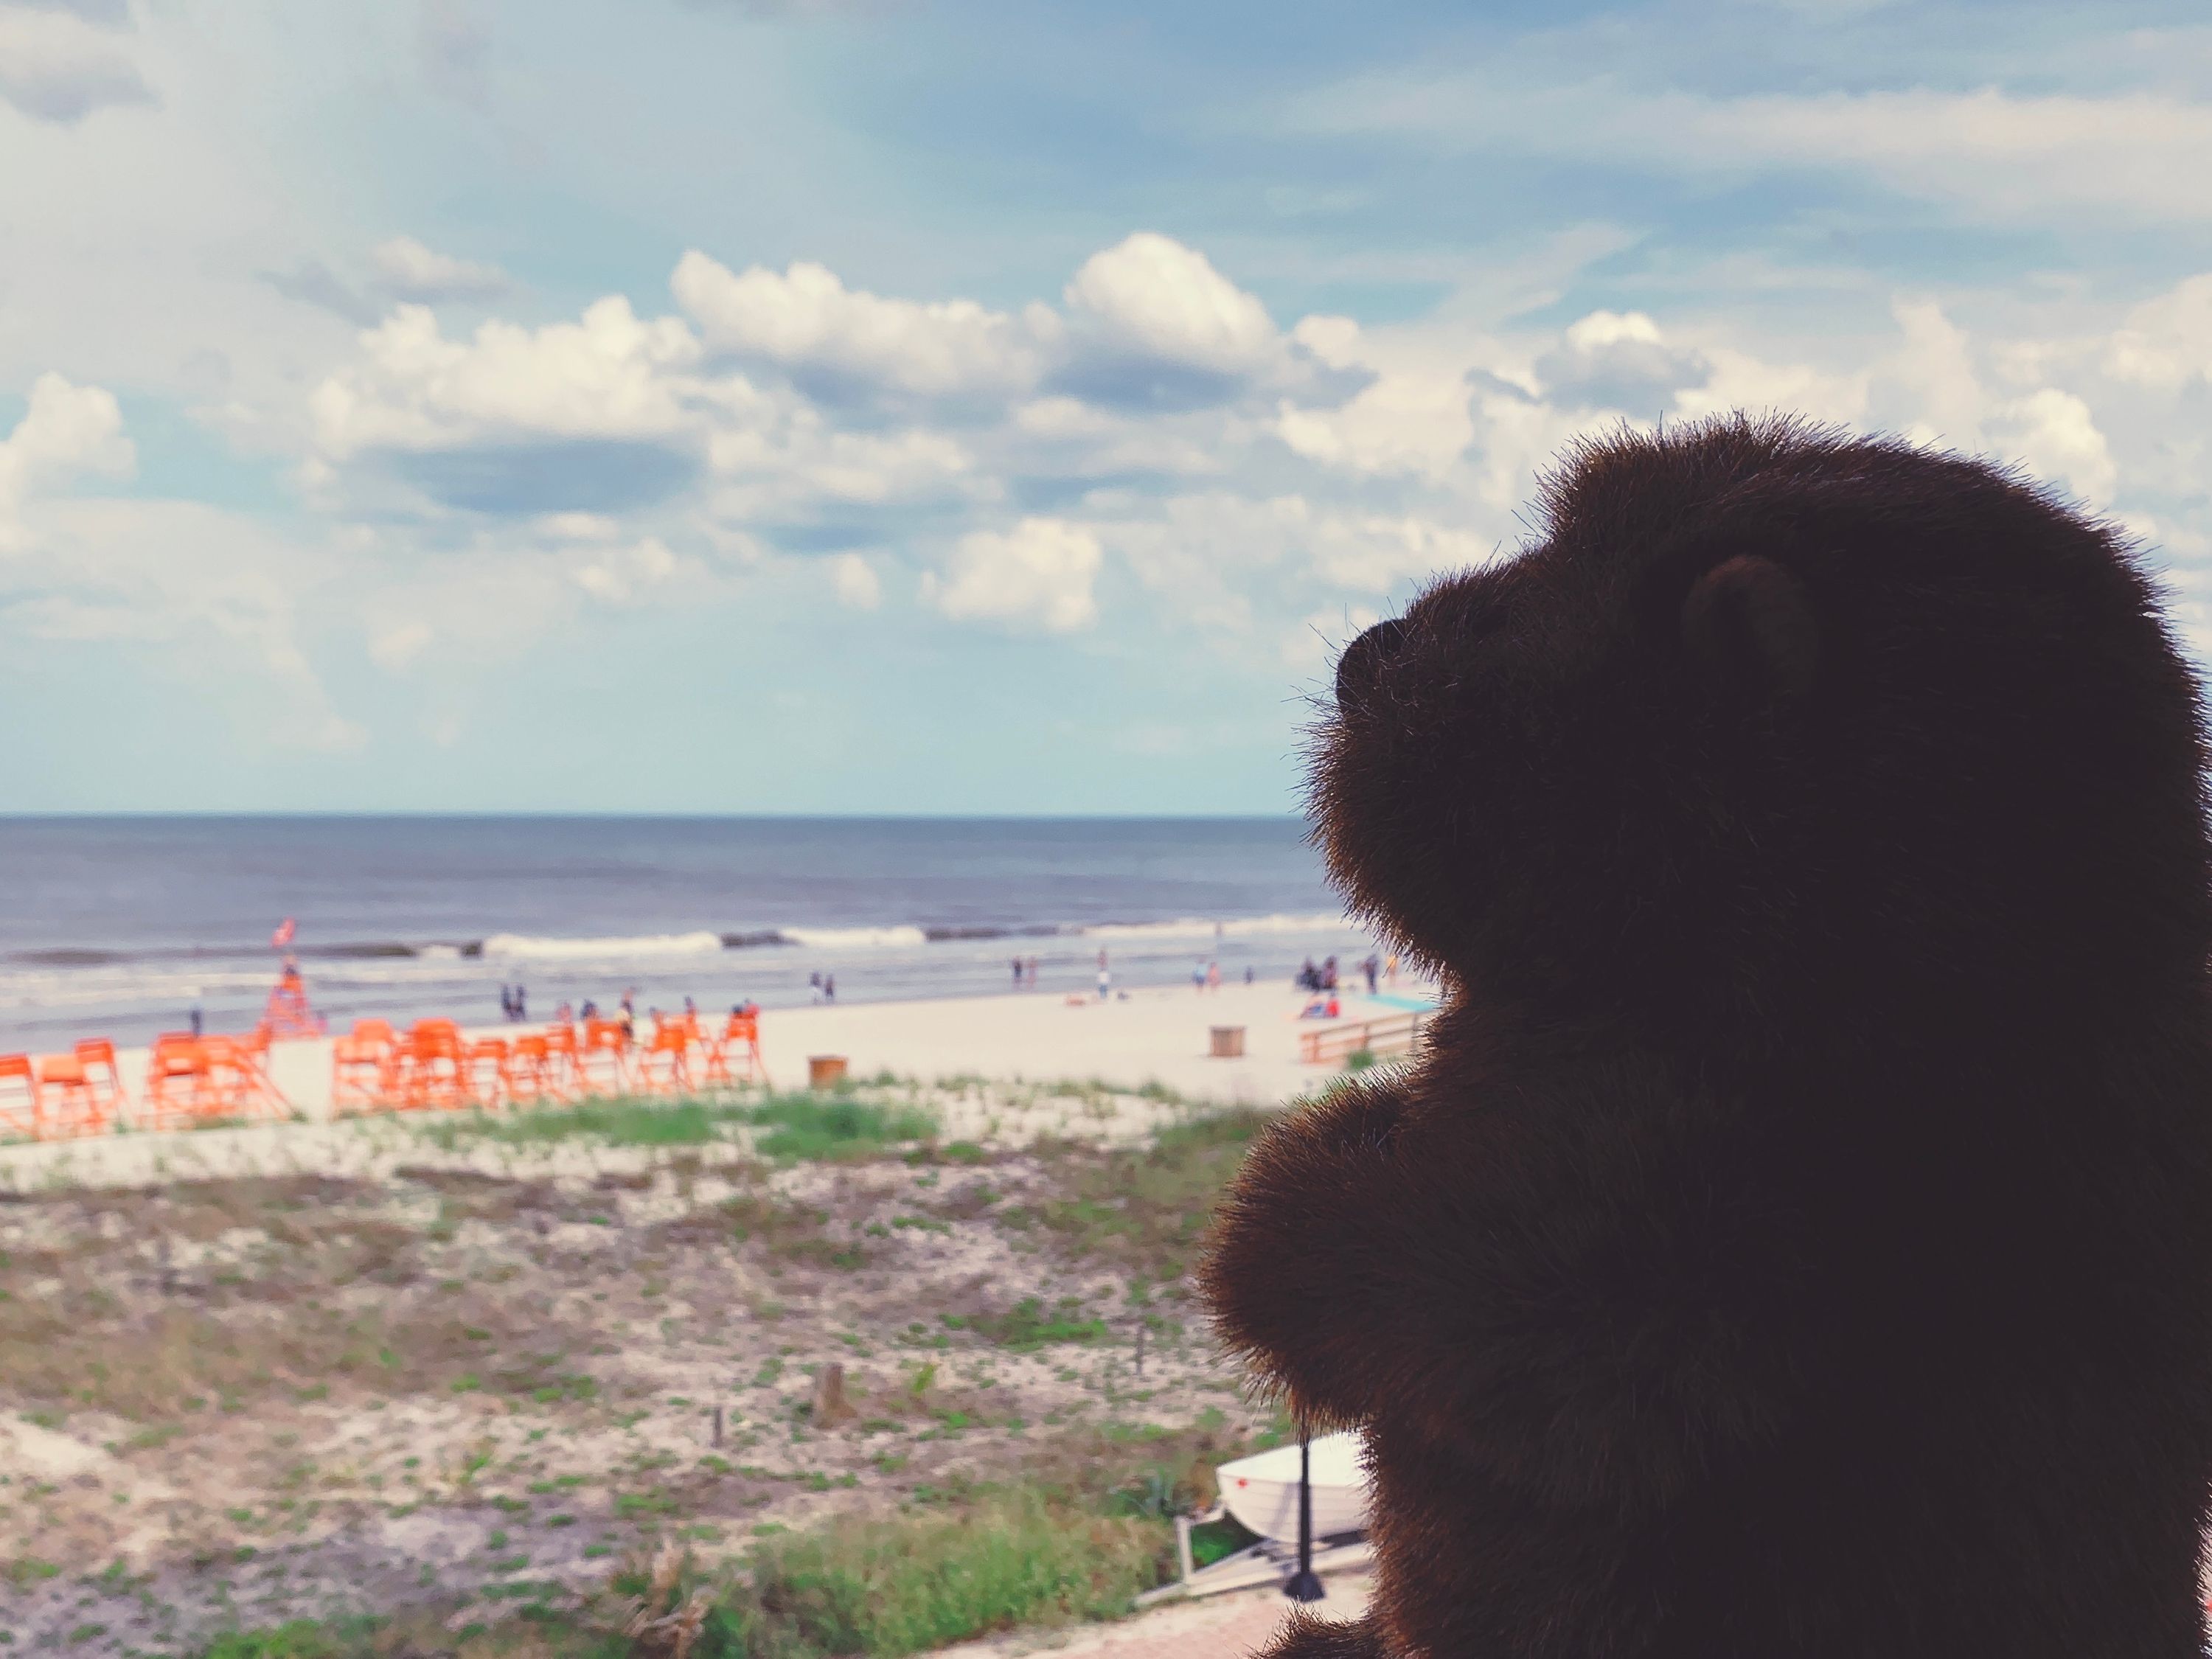 The Groundhog watches the beach from a balcony.